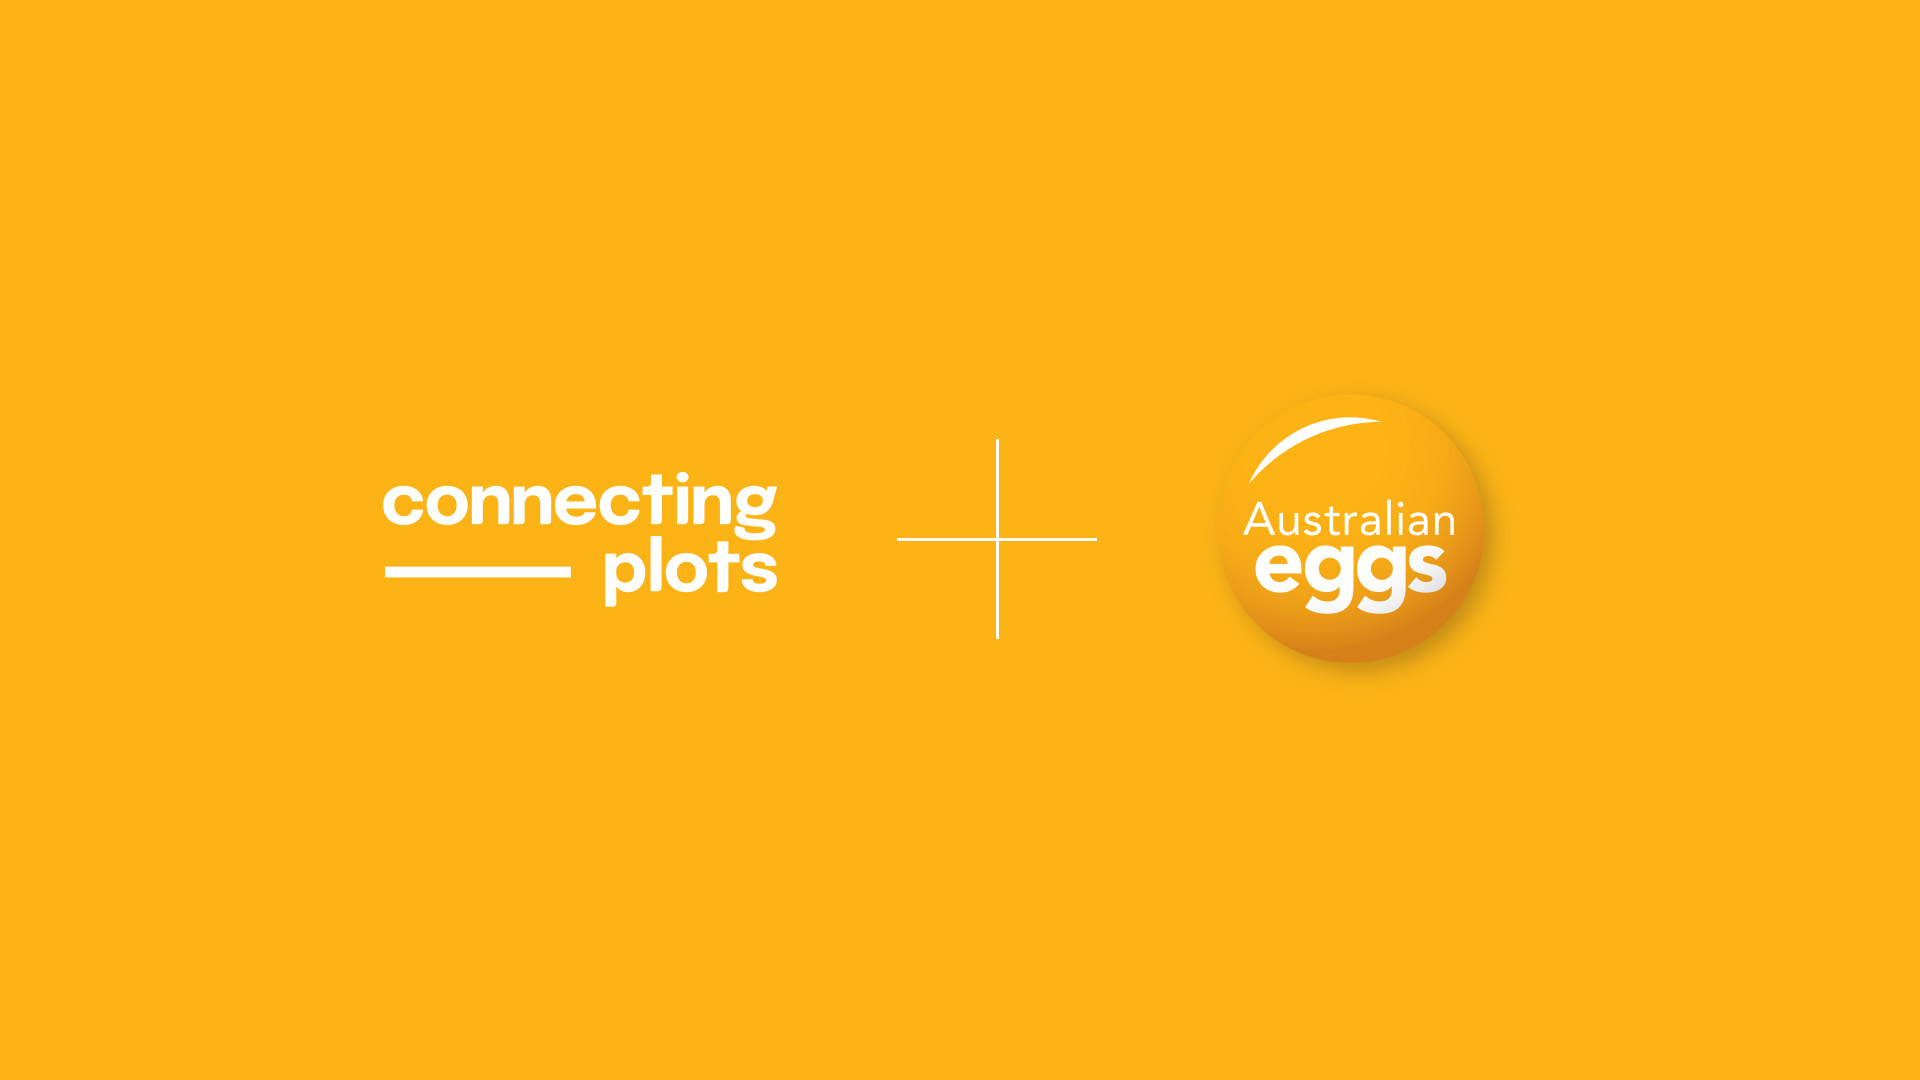 Australian Eggs appoints Connecting Plots as creative partner following a competitive pitch